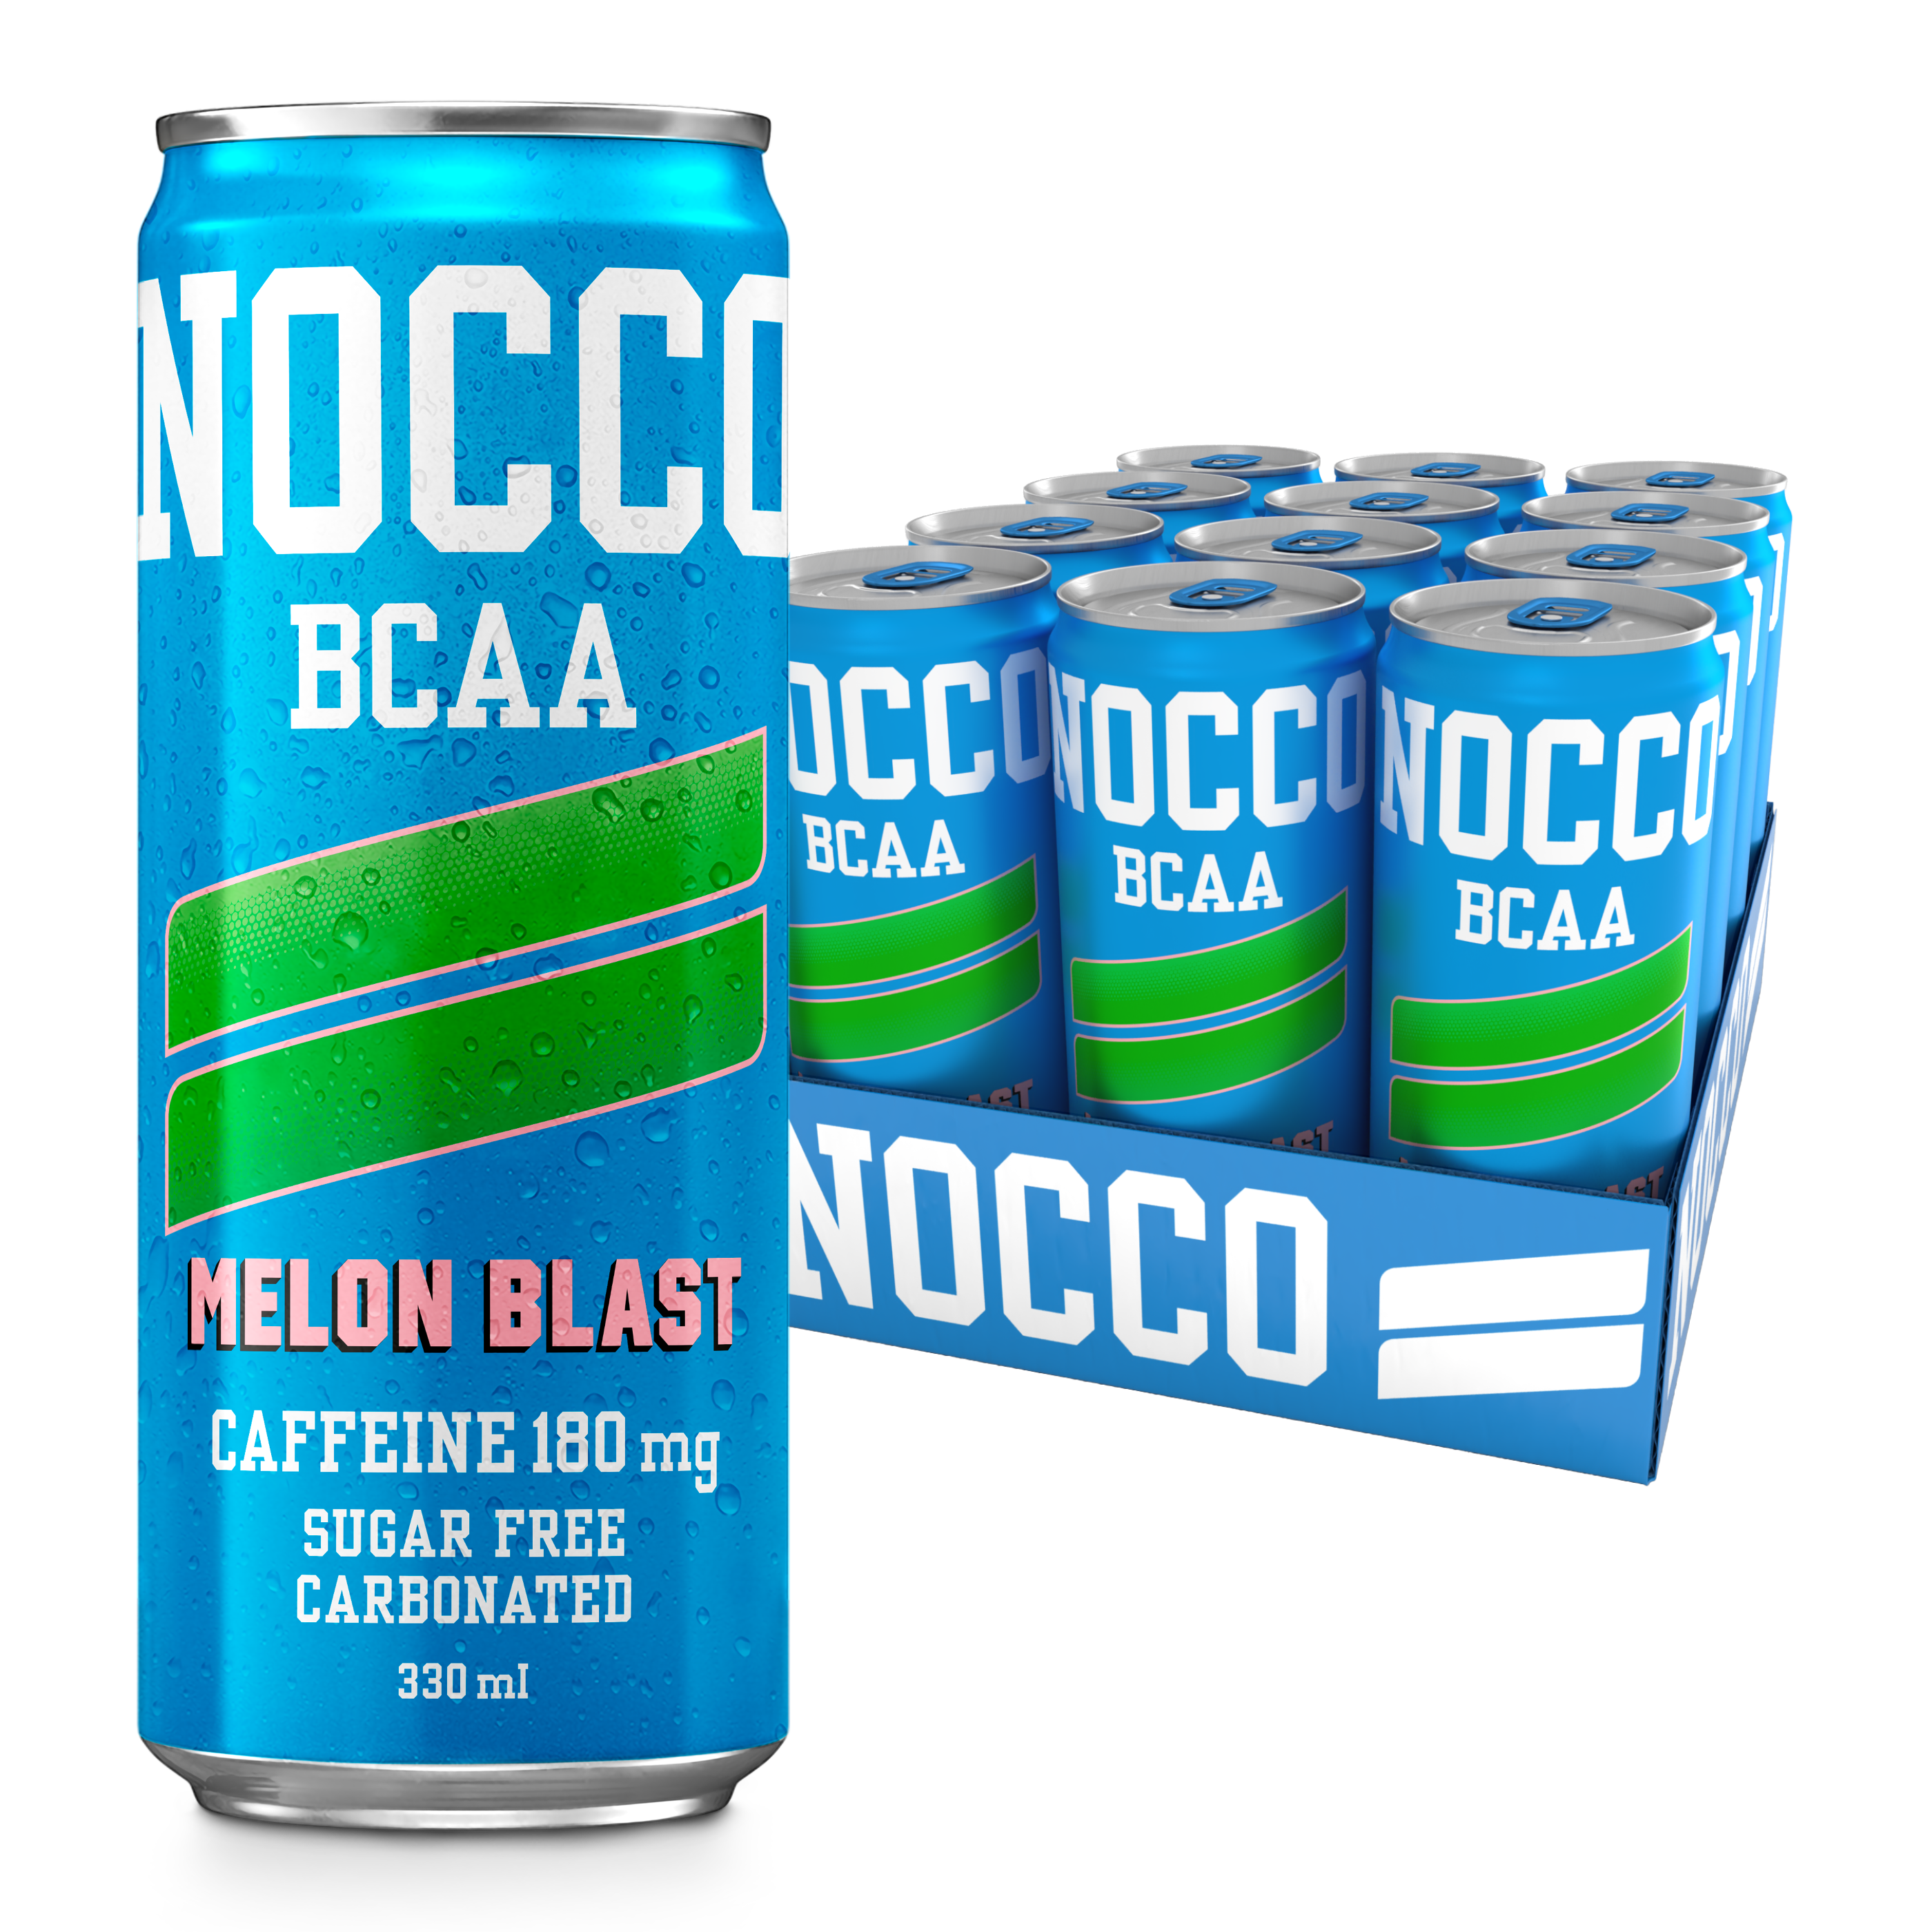 Tray of Nocco Melon Blast cans